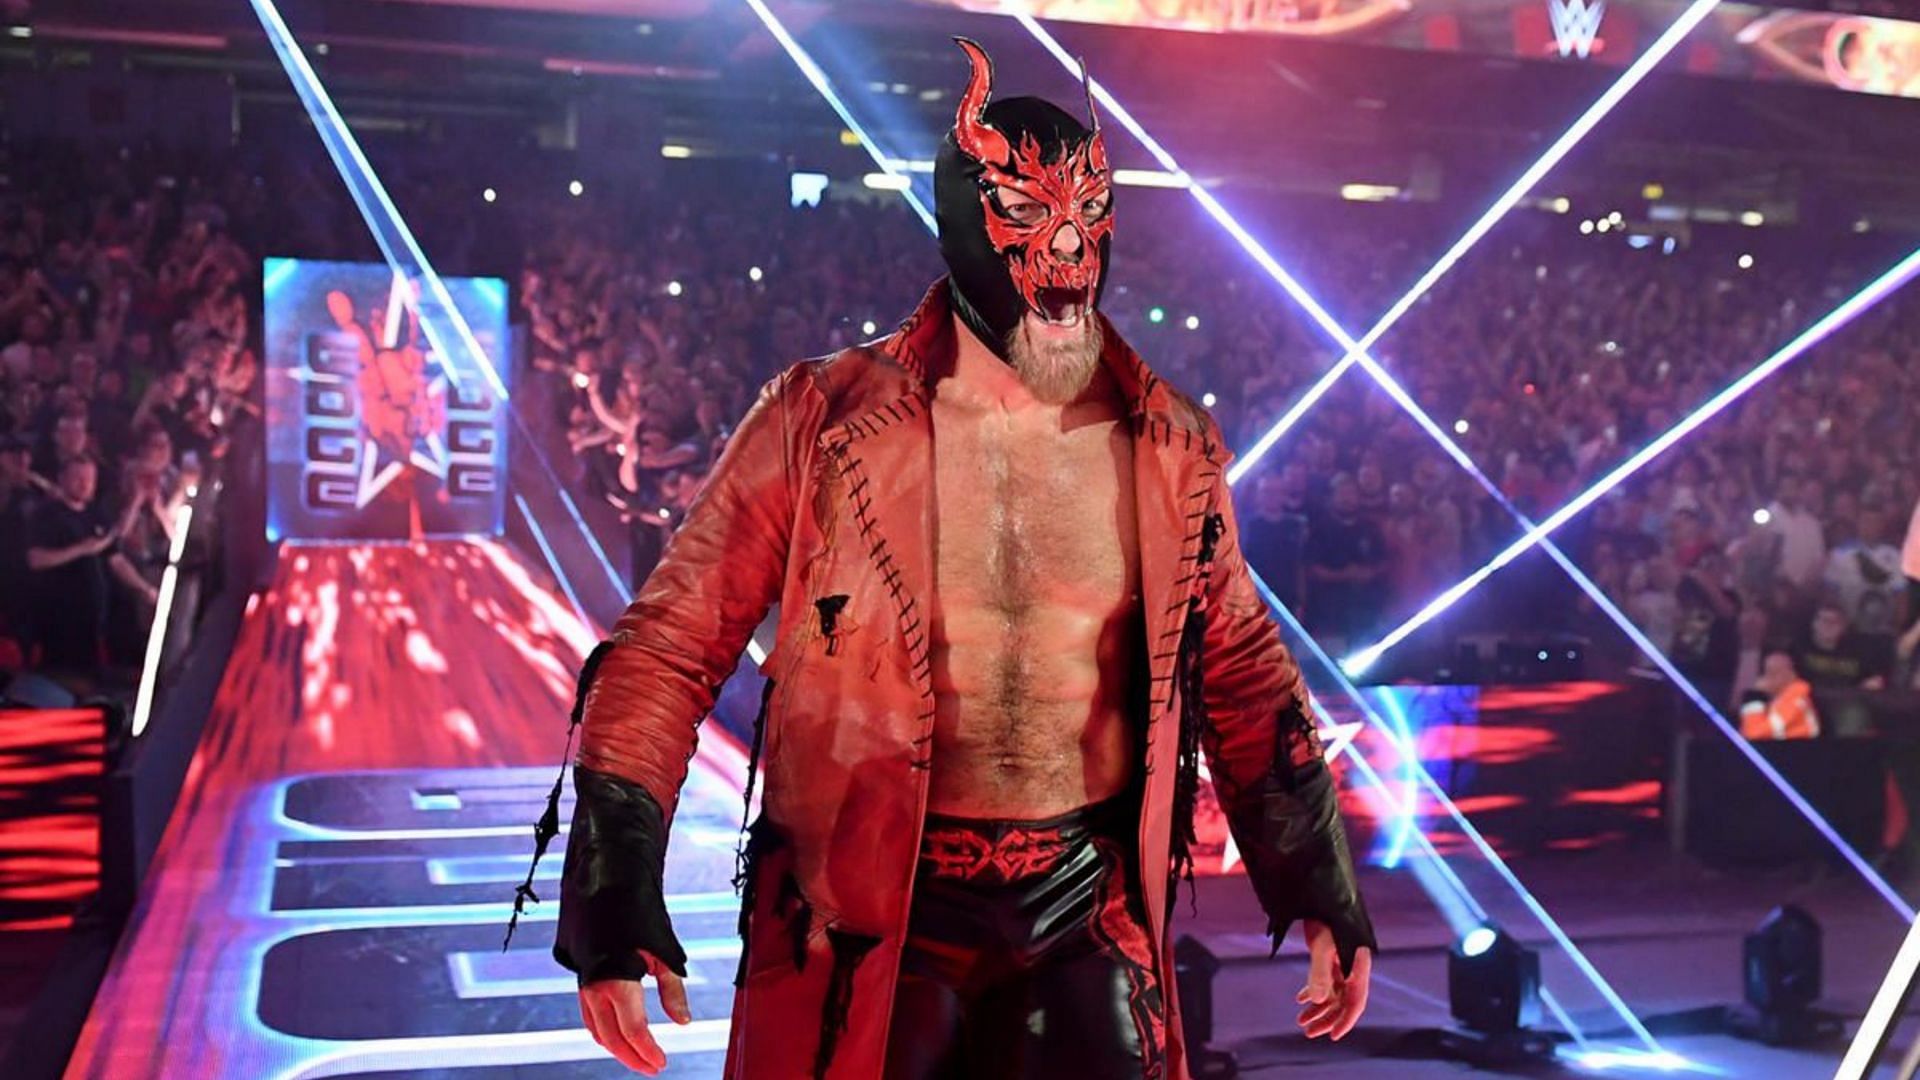 Edge wearing a mask in his entrance